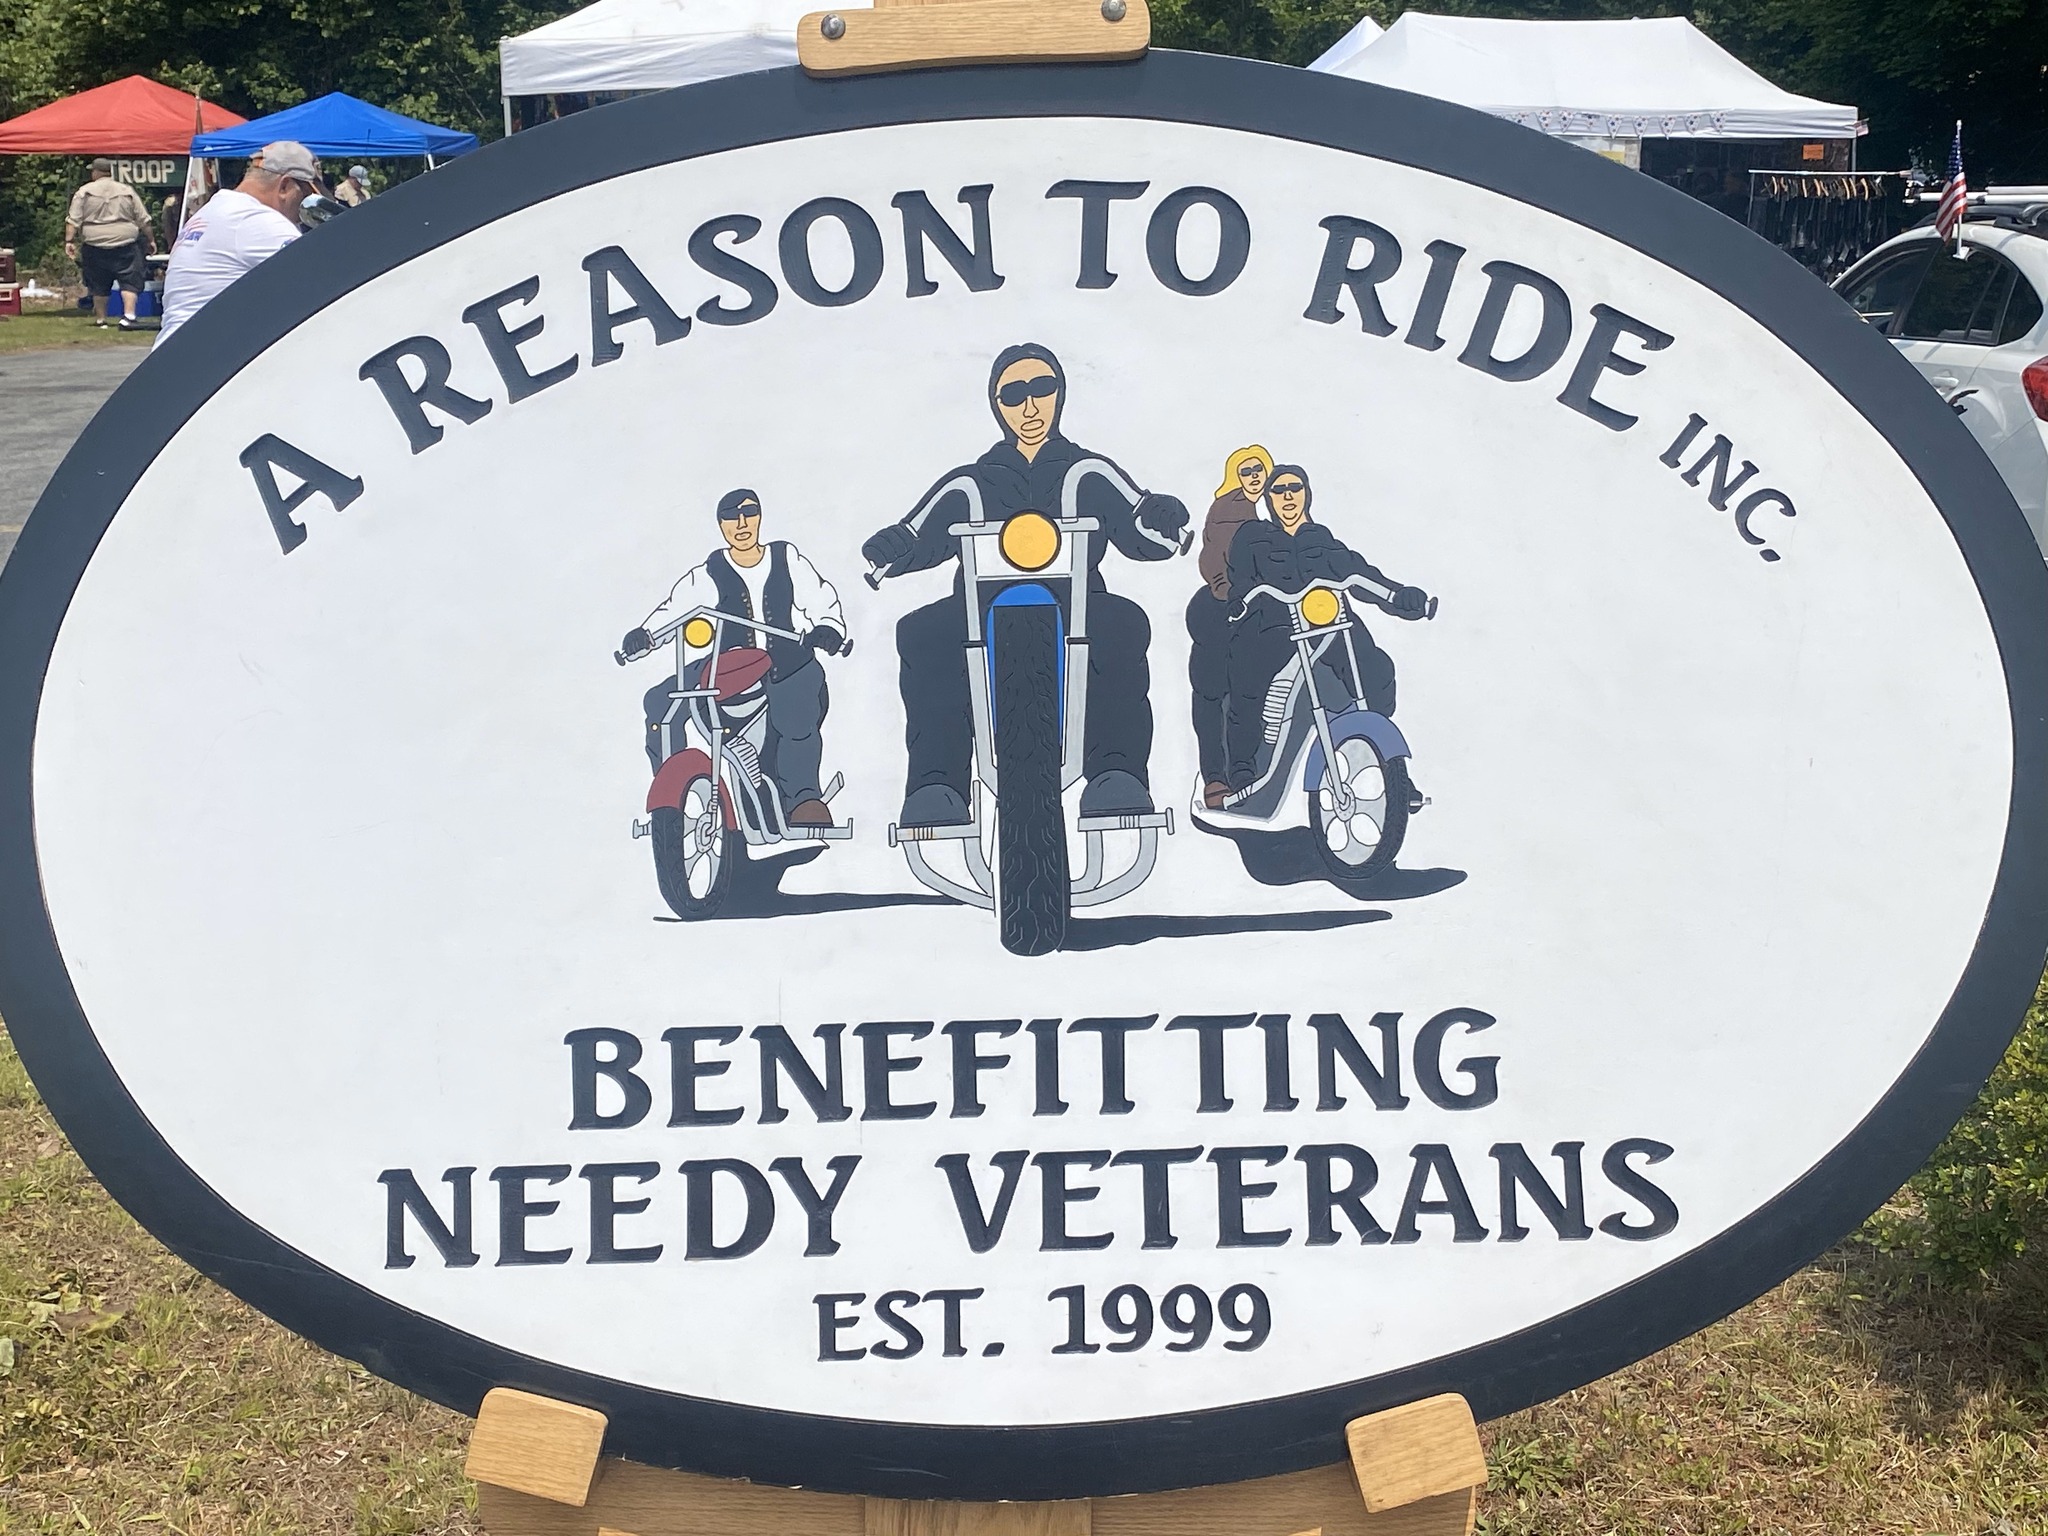 DATTCO Supports “A Reason to Ride Inc.”